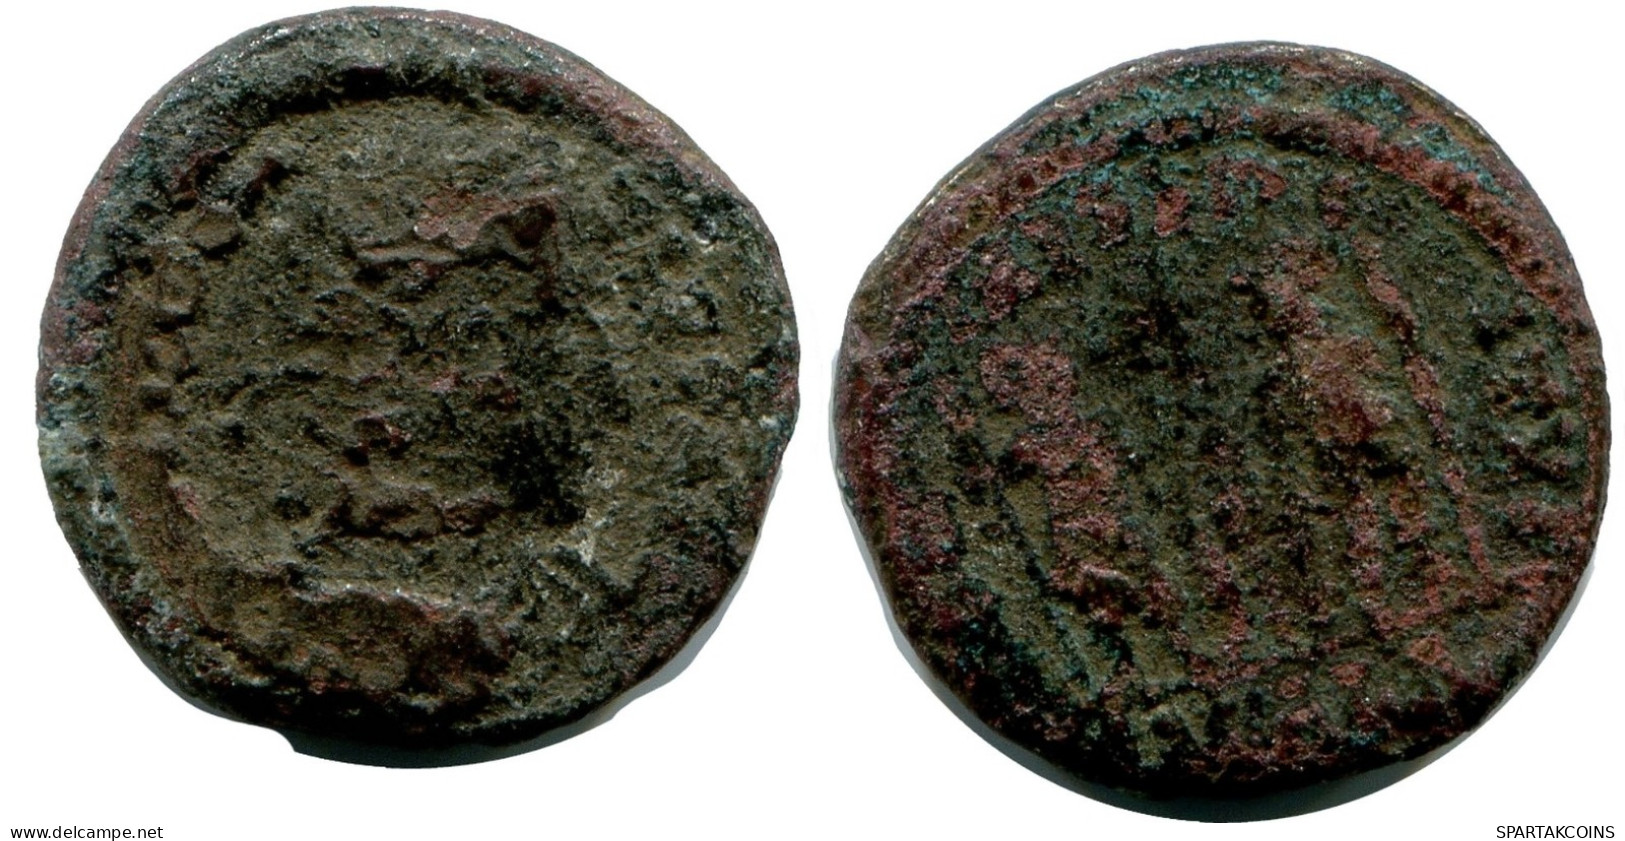 ROMAN Pièce MINTED IN ALEKSANDRIA FROM THE ROYAL ONTARIO MUSEUM #ANC10184.14.F.A - L'Empire Chrétien (307 à 363)